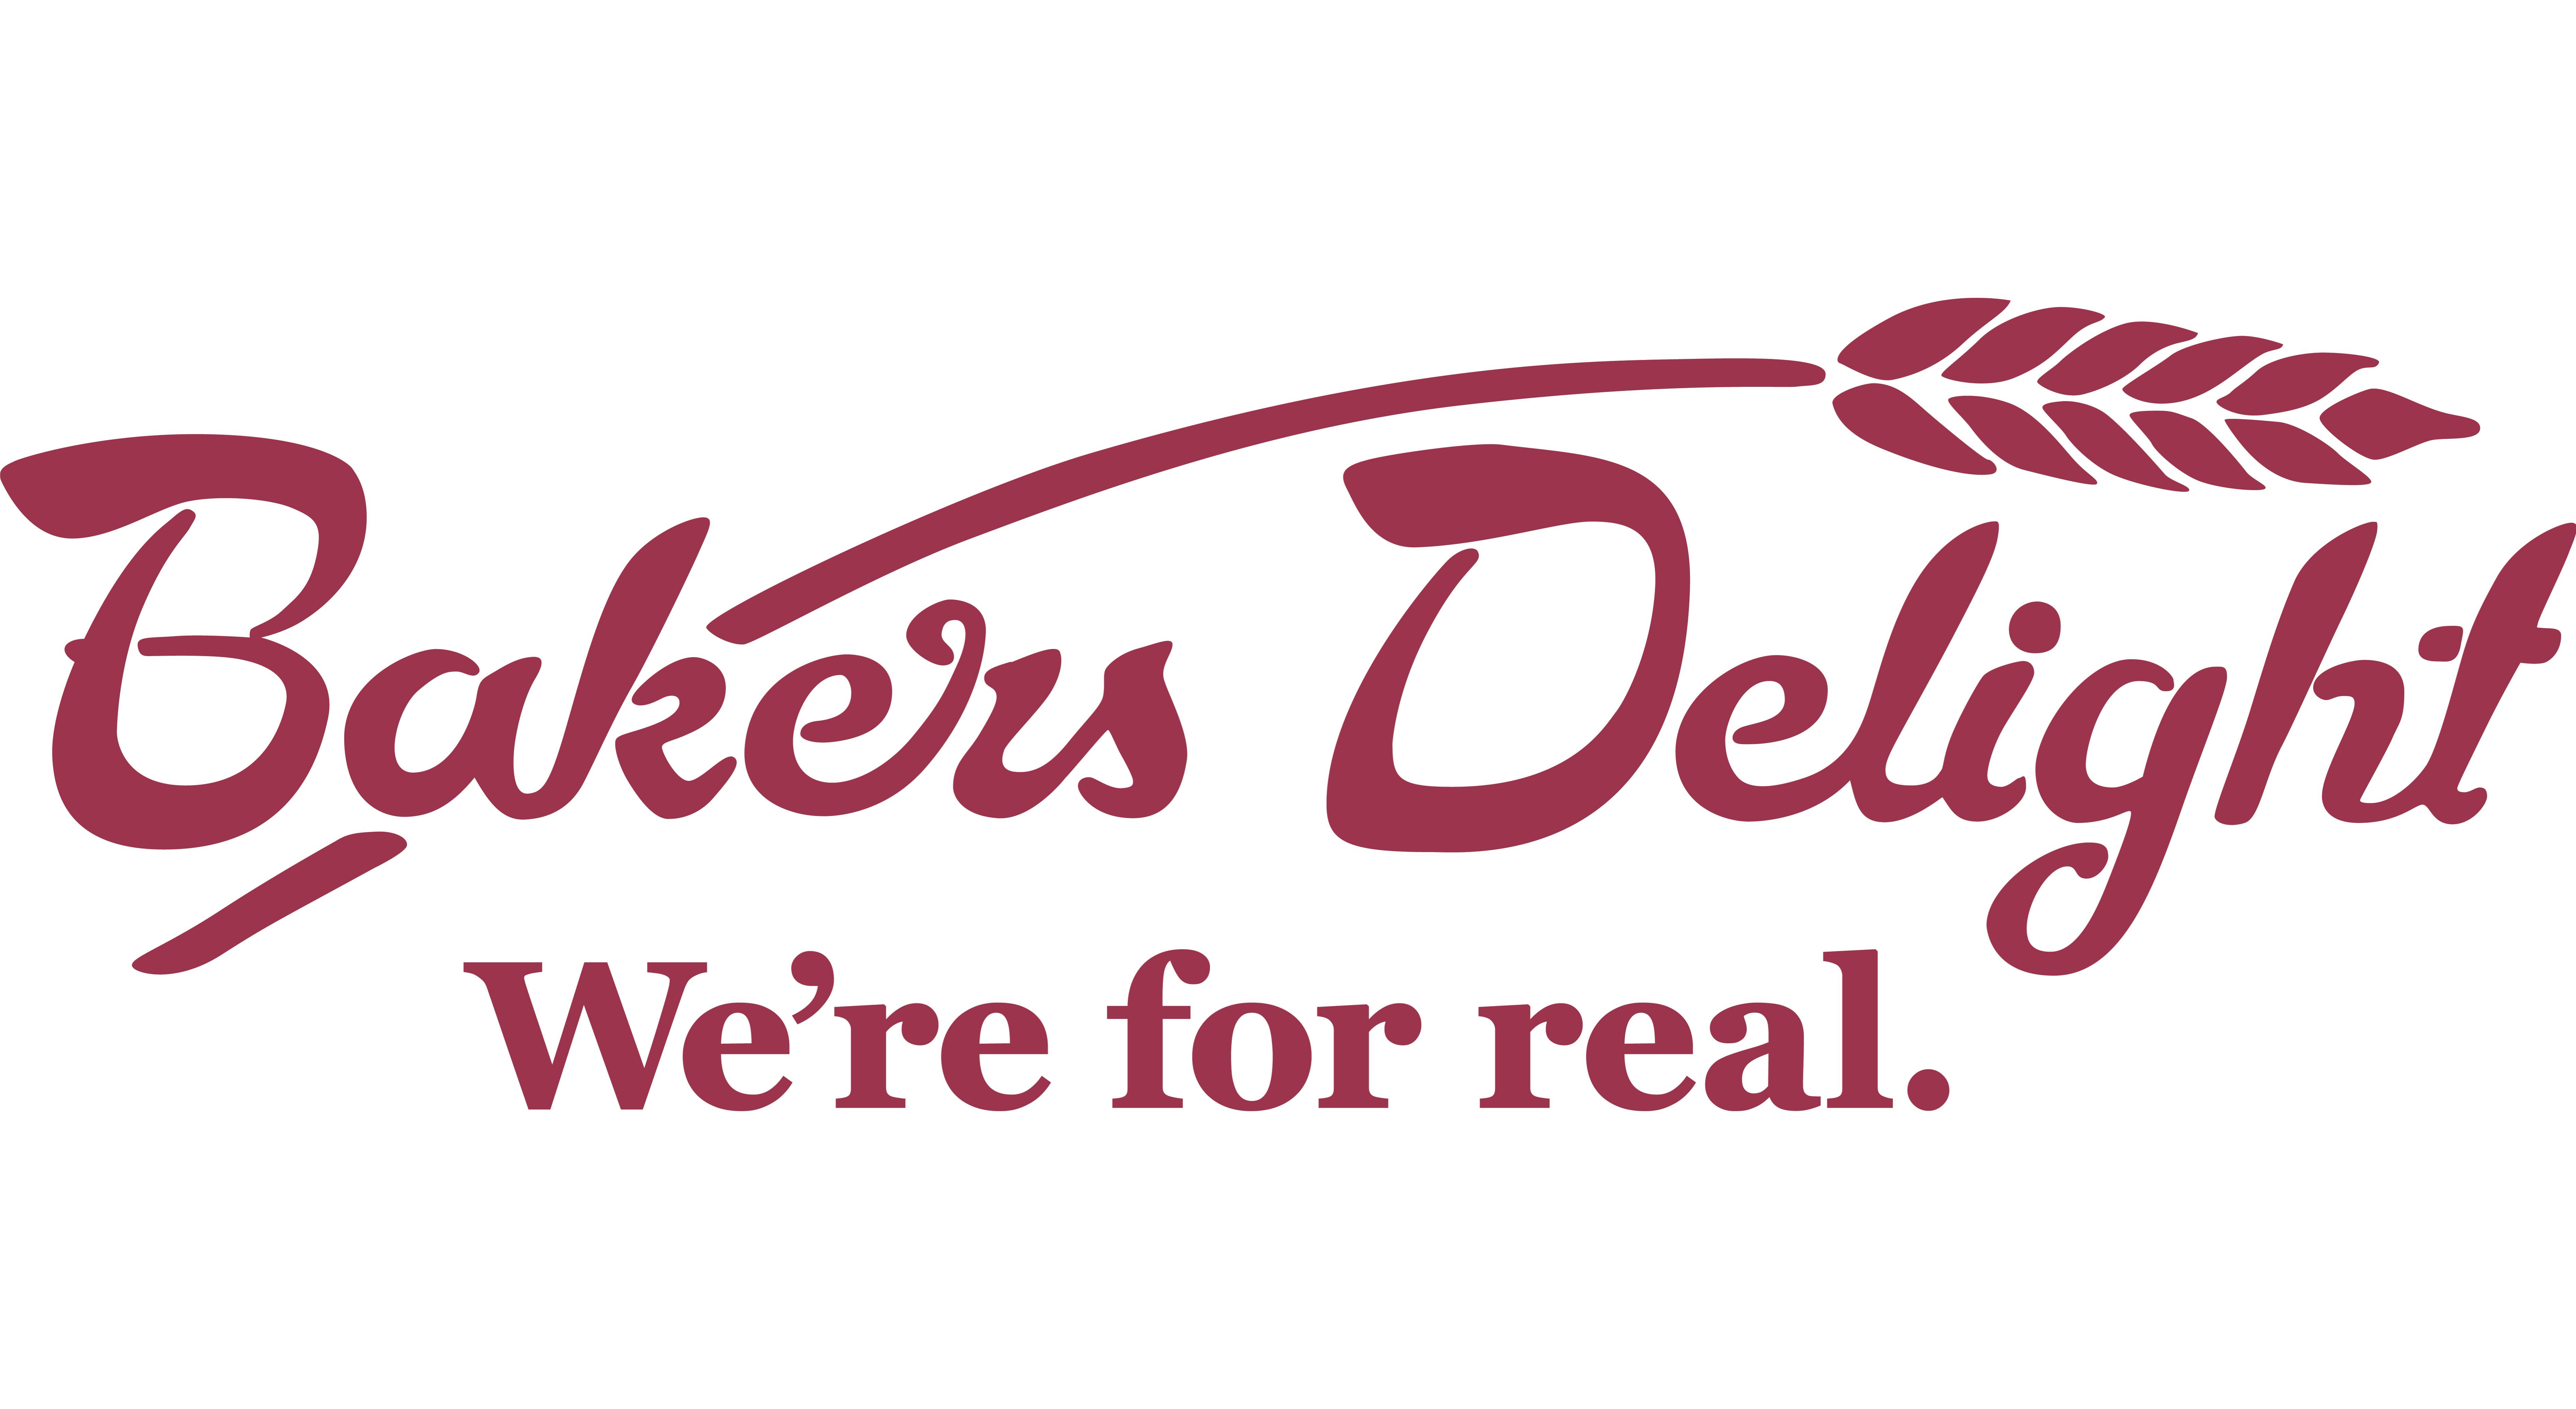 Bakers Delight (@bakersdelight) • Instagram photos and videos